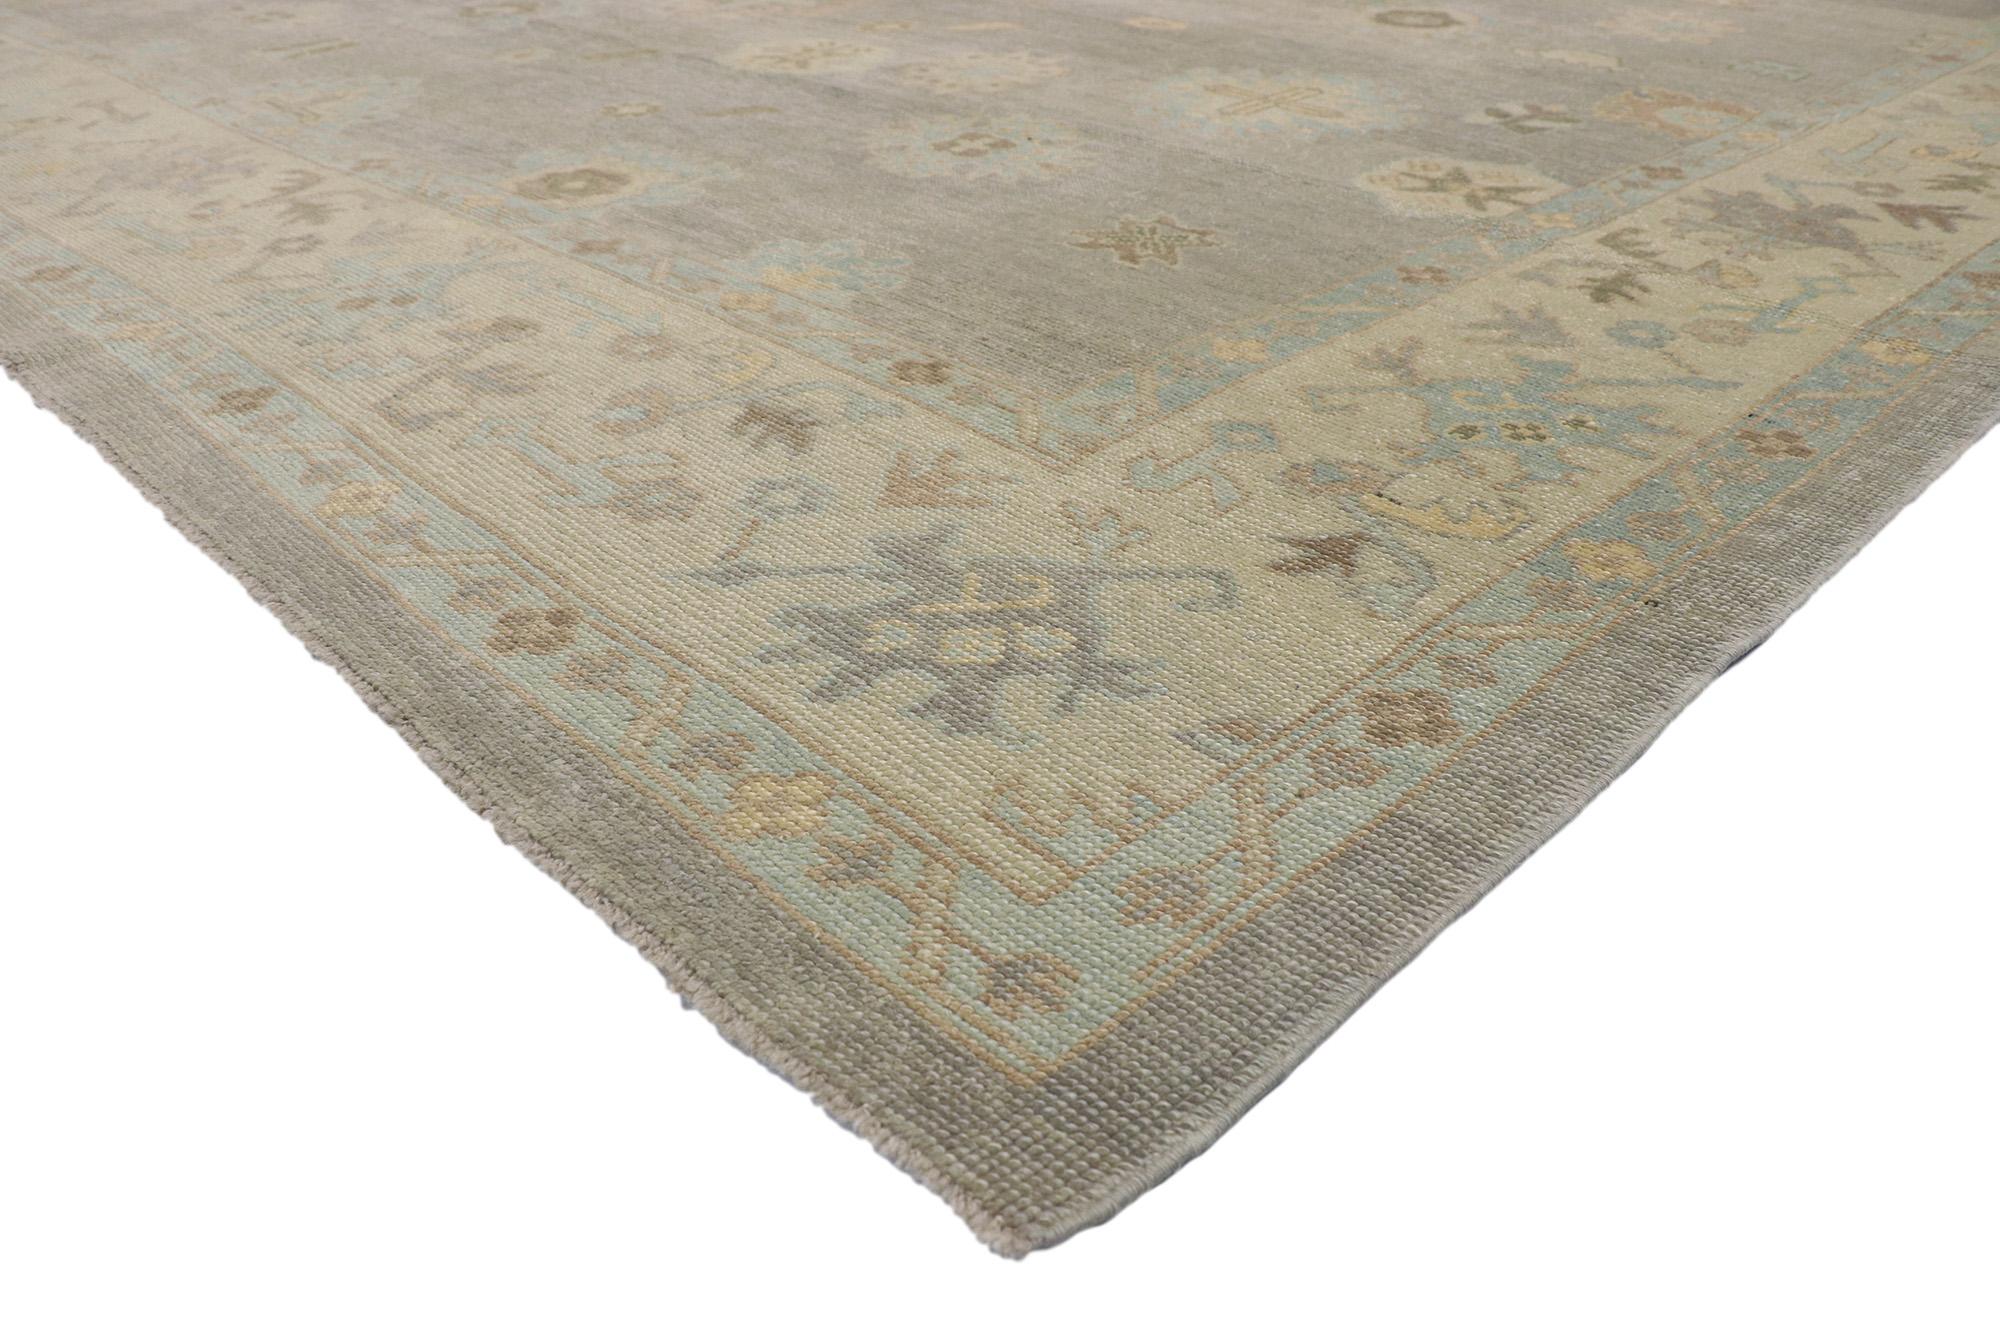 51608 Modern Oushak Turkish Rug, 11'07 x 16'03. Turkish Oushak rugs, originating from the Western region of Oushak in Turkey, are renowned for their intricate patterns, serene color schemes, and opulent wool materials. With roots tracing back to the